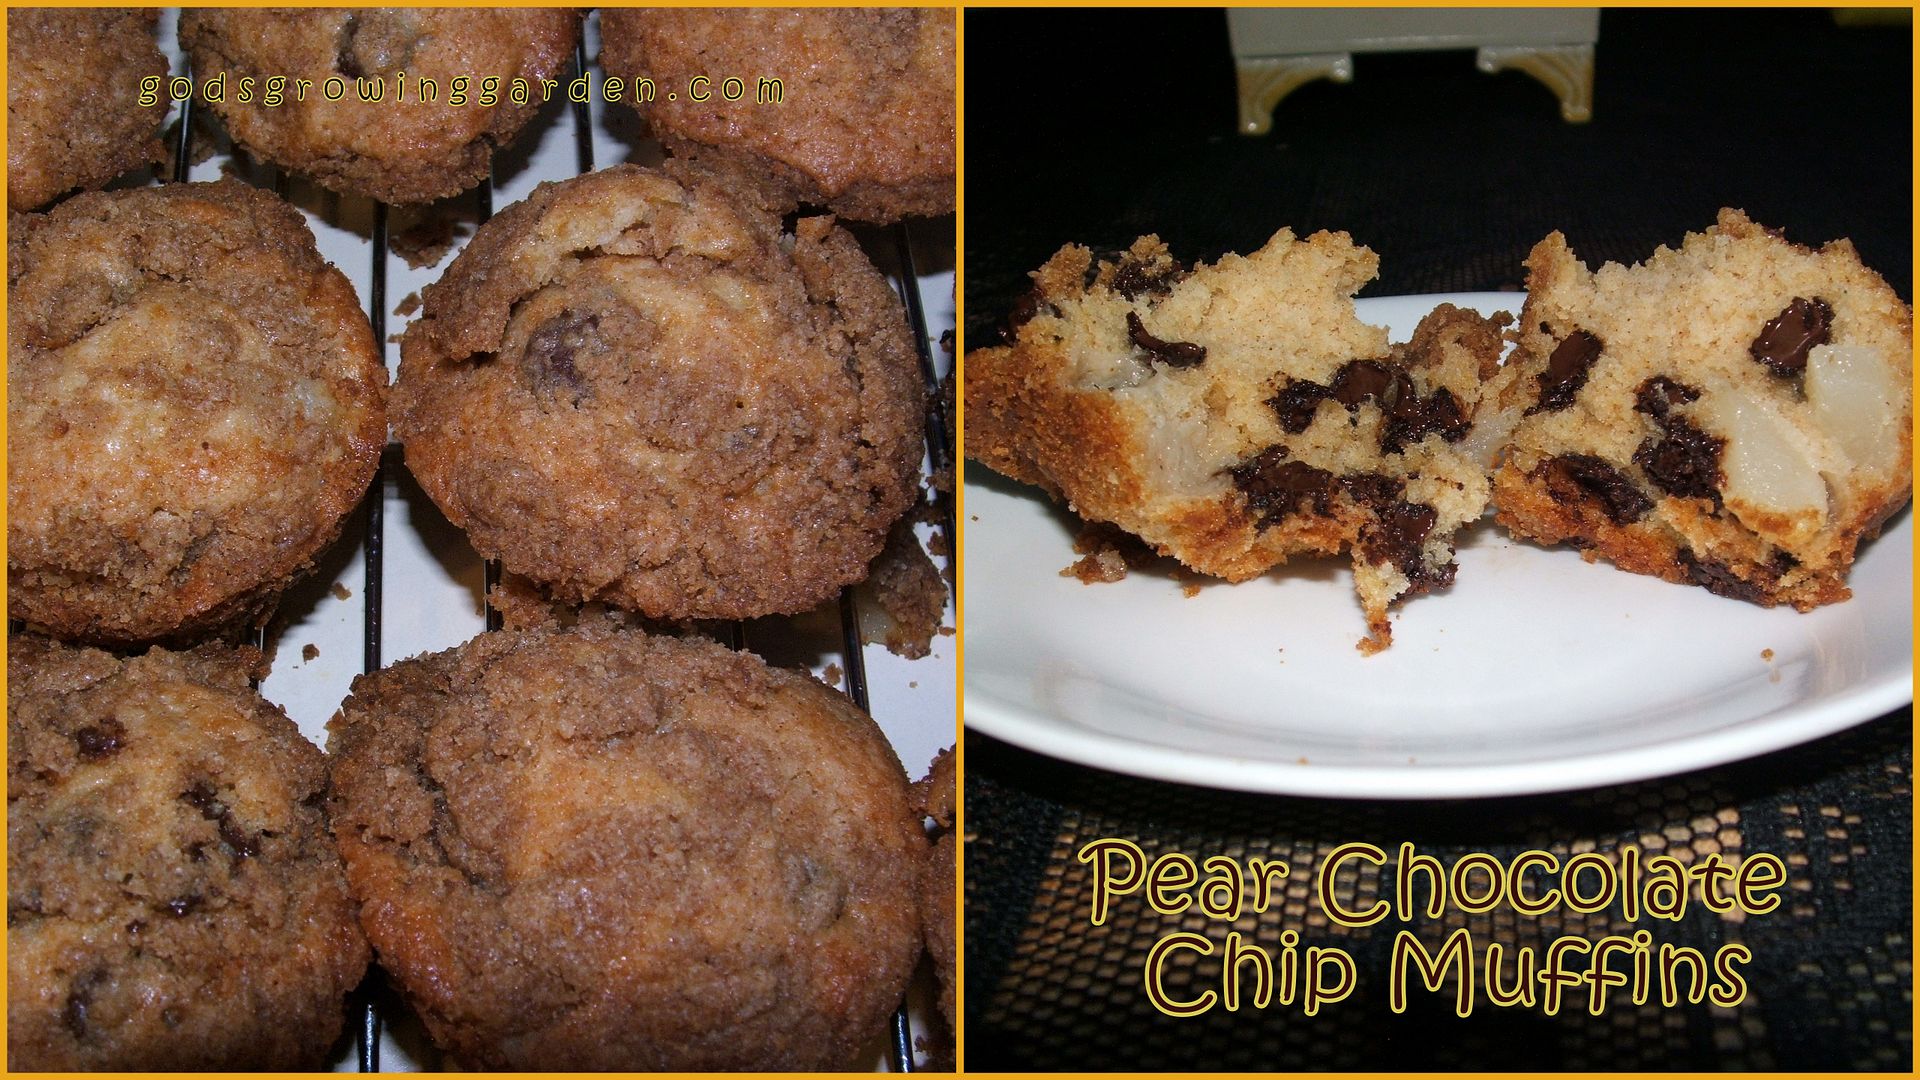 Pear Chocolate Chip Muffins by Angie Ouellette-Tower for godsgrowinggarden.com photo 2013-10-16_zps3b88bb22.jpg